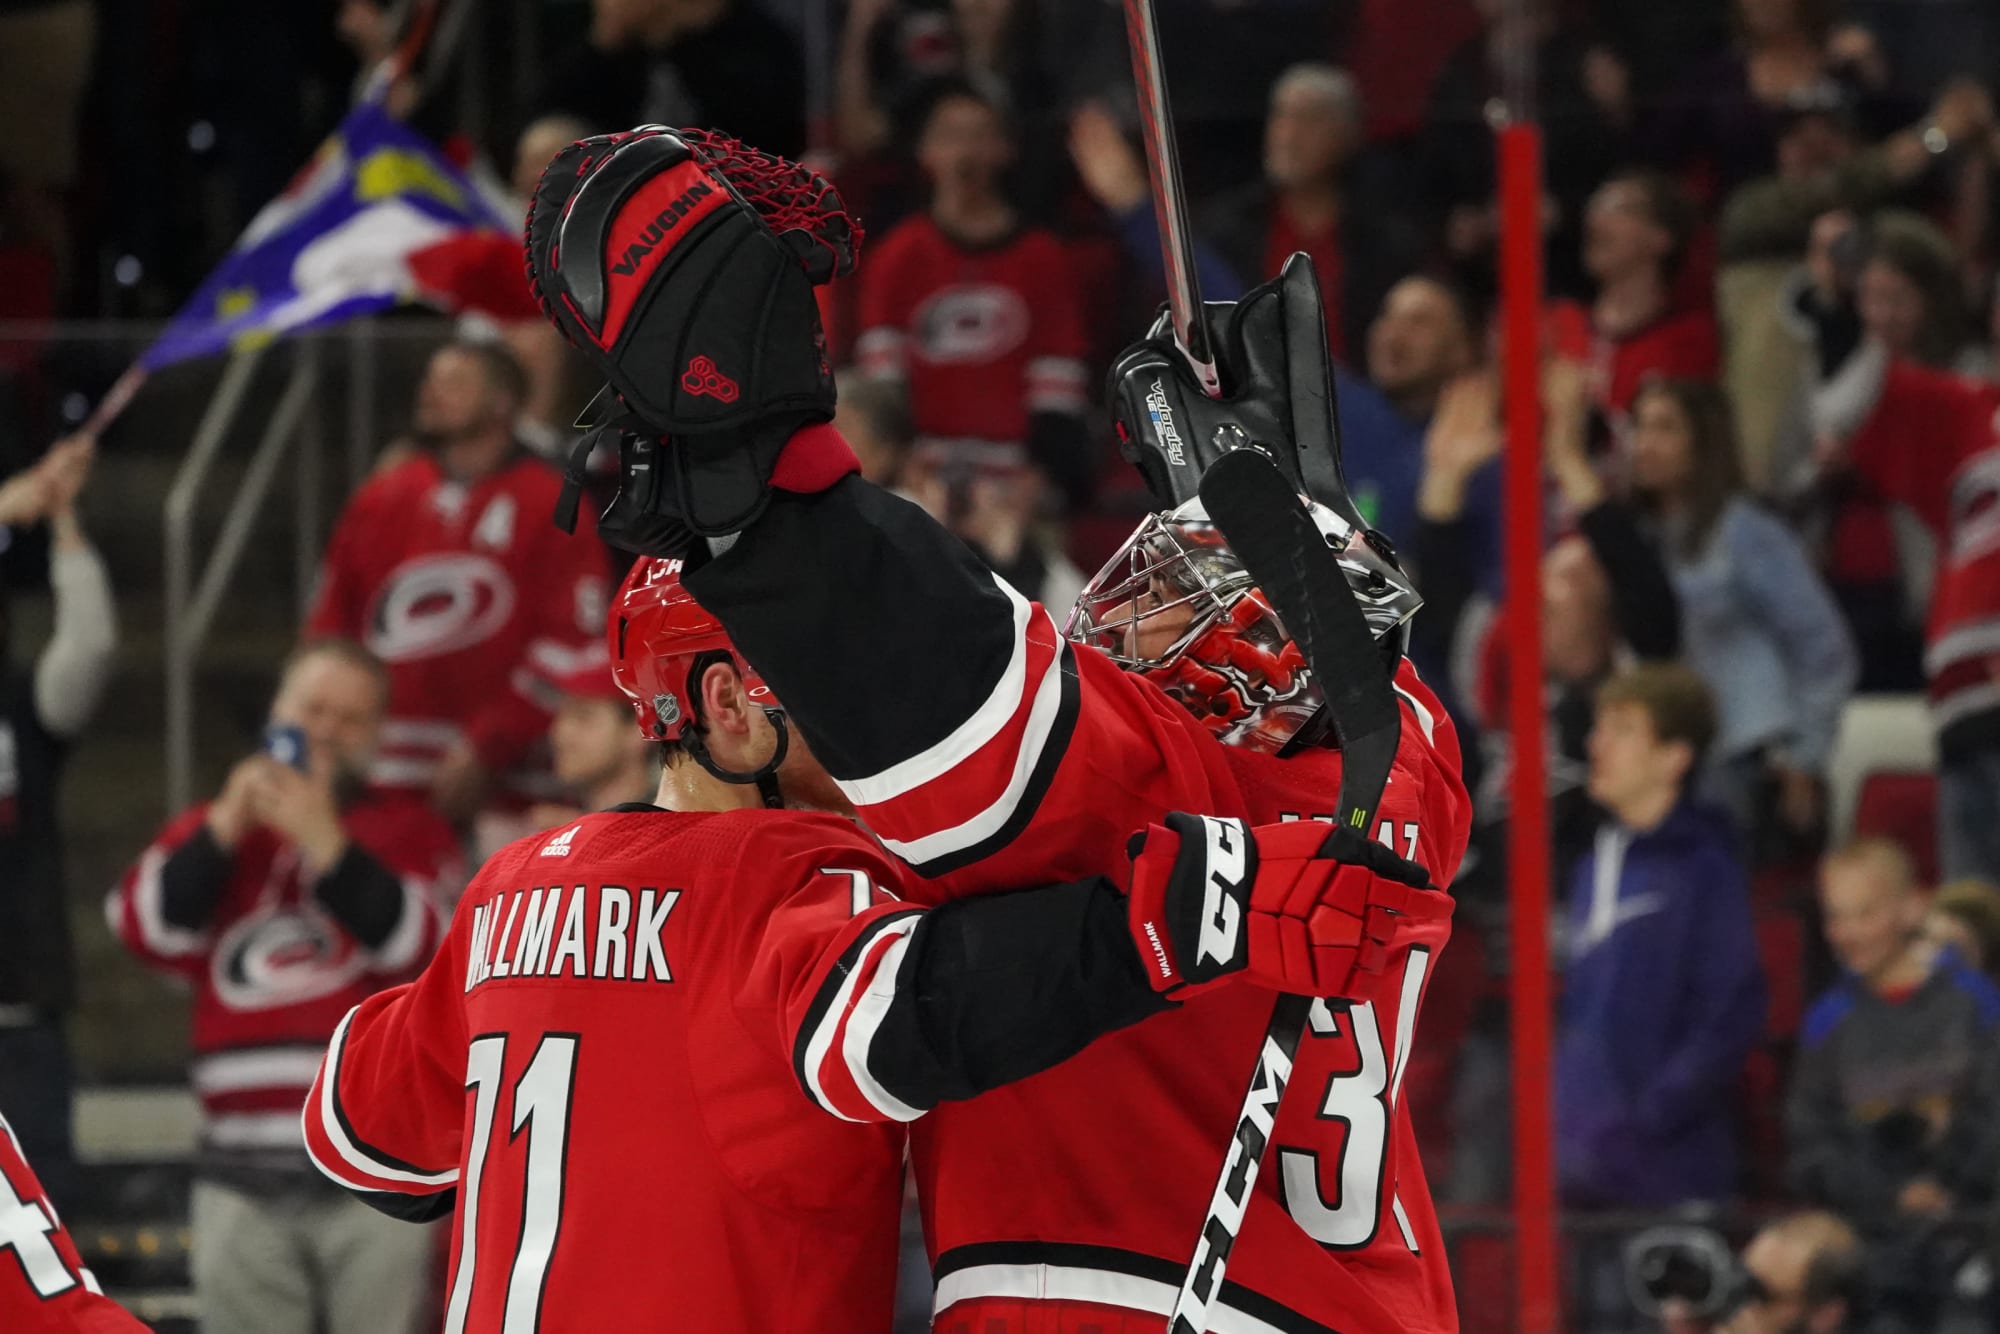 Carolina Hurricanes 3 Takeaways from the PLAYOFF CLINCHING WIN